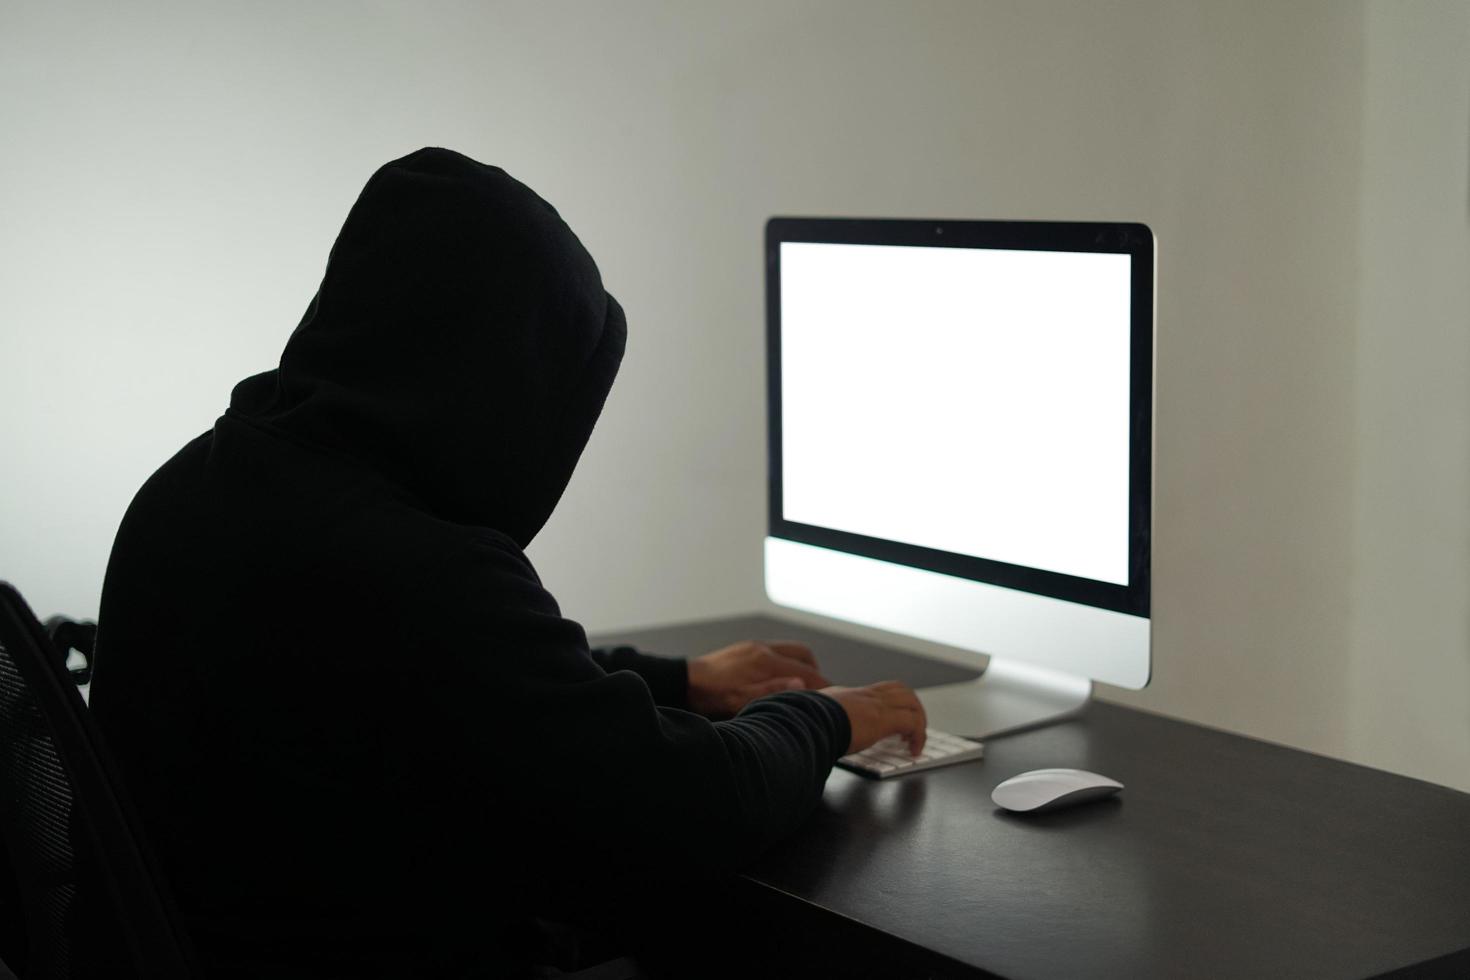 Indonesia, 12212021 - a man wearing a black hoodie in front of the white blank screen photo